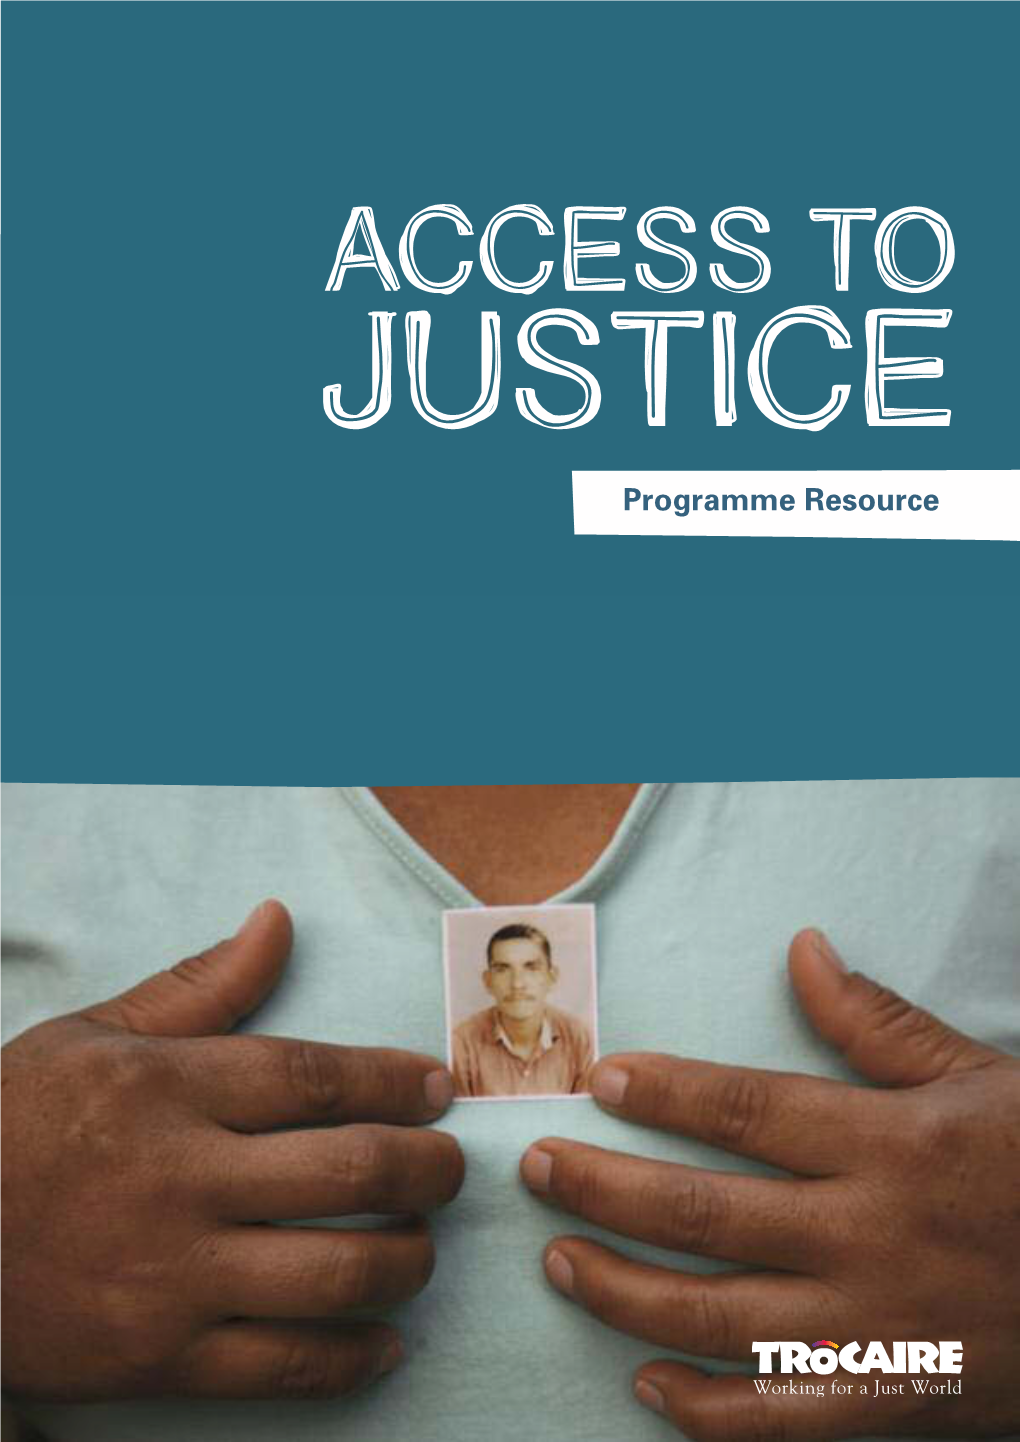 Access to Justice Programme Resource 2012